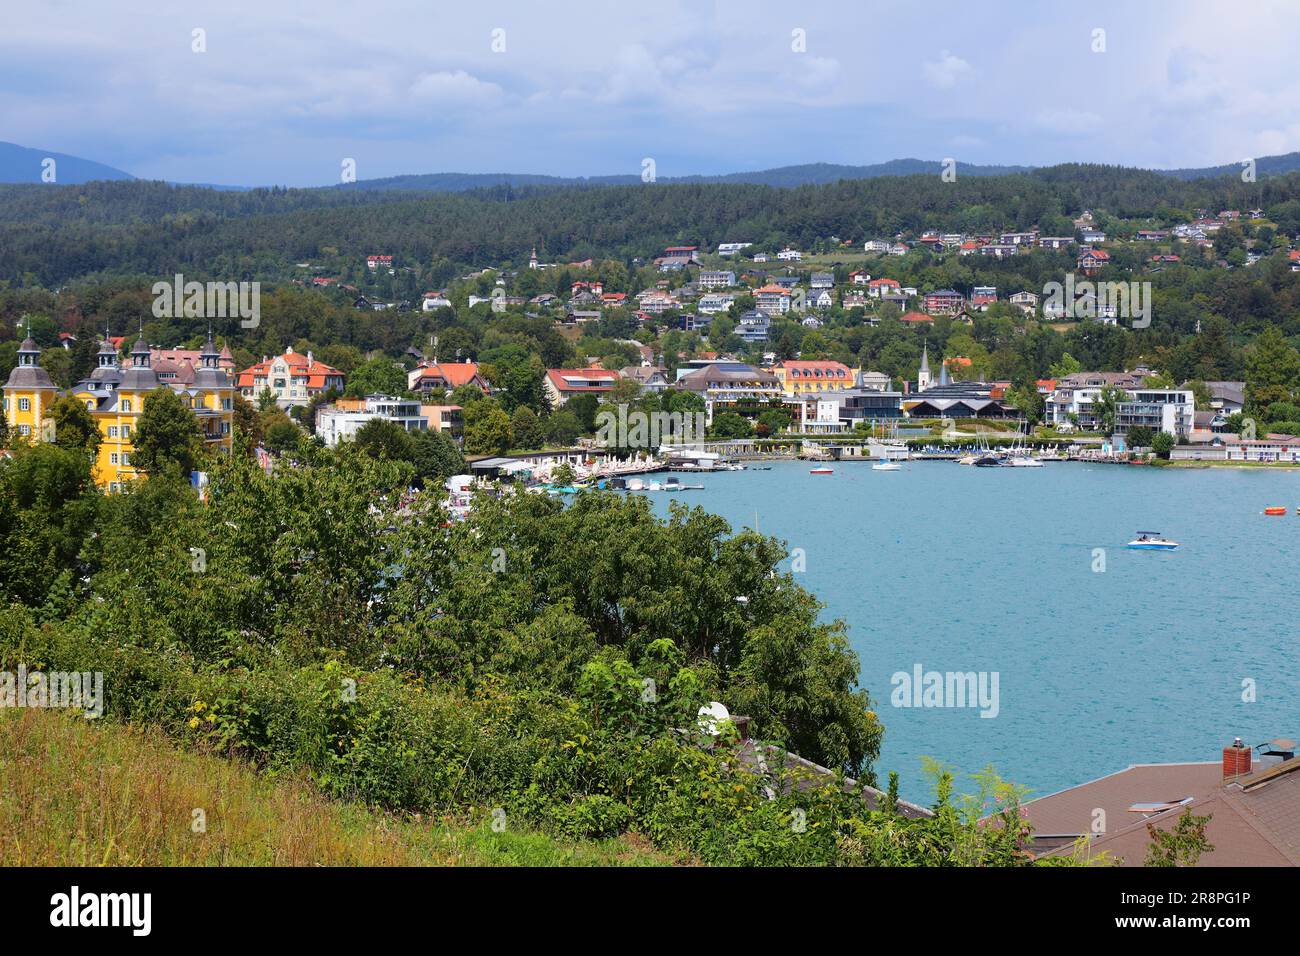 Worthersee mountain lake in Austrian Alps. Austria landscape in State of Carinthia. Town of Velden am Worther See. Stock Photo